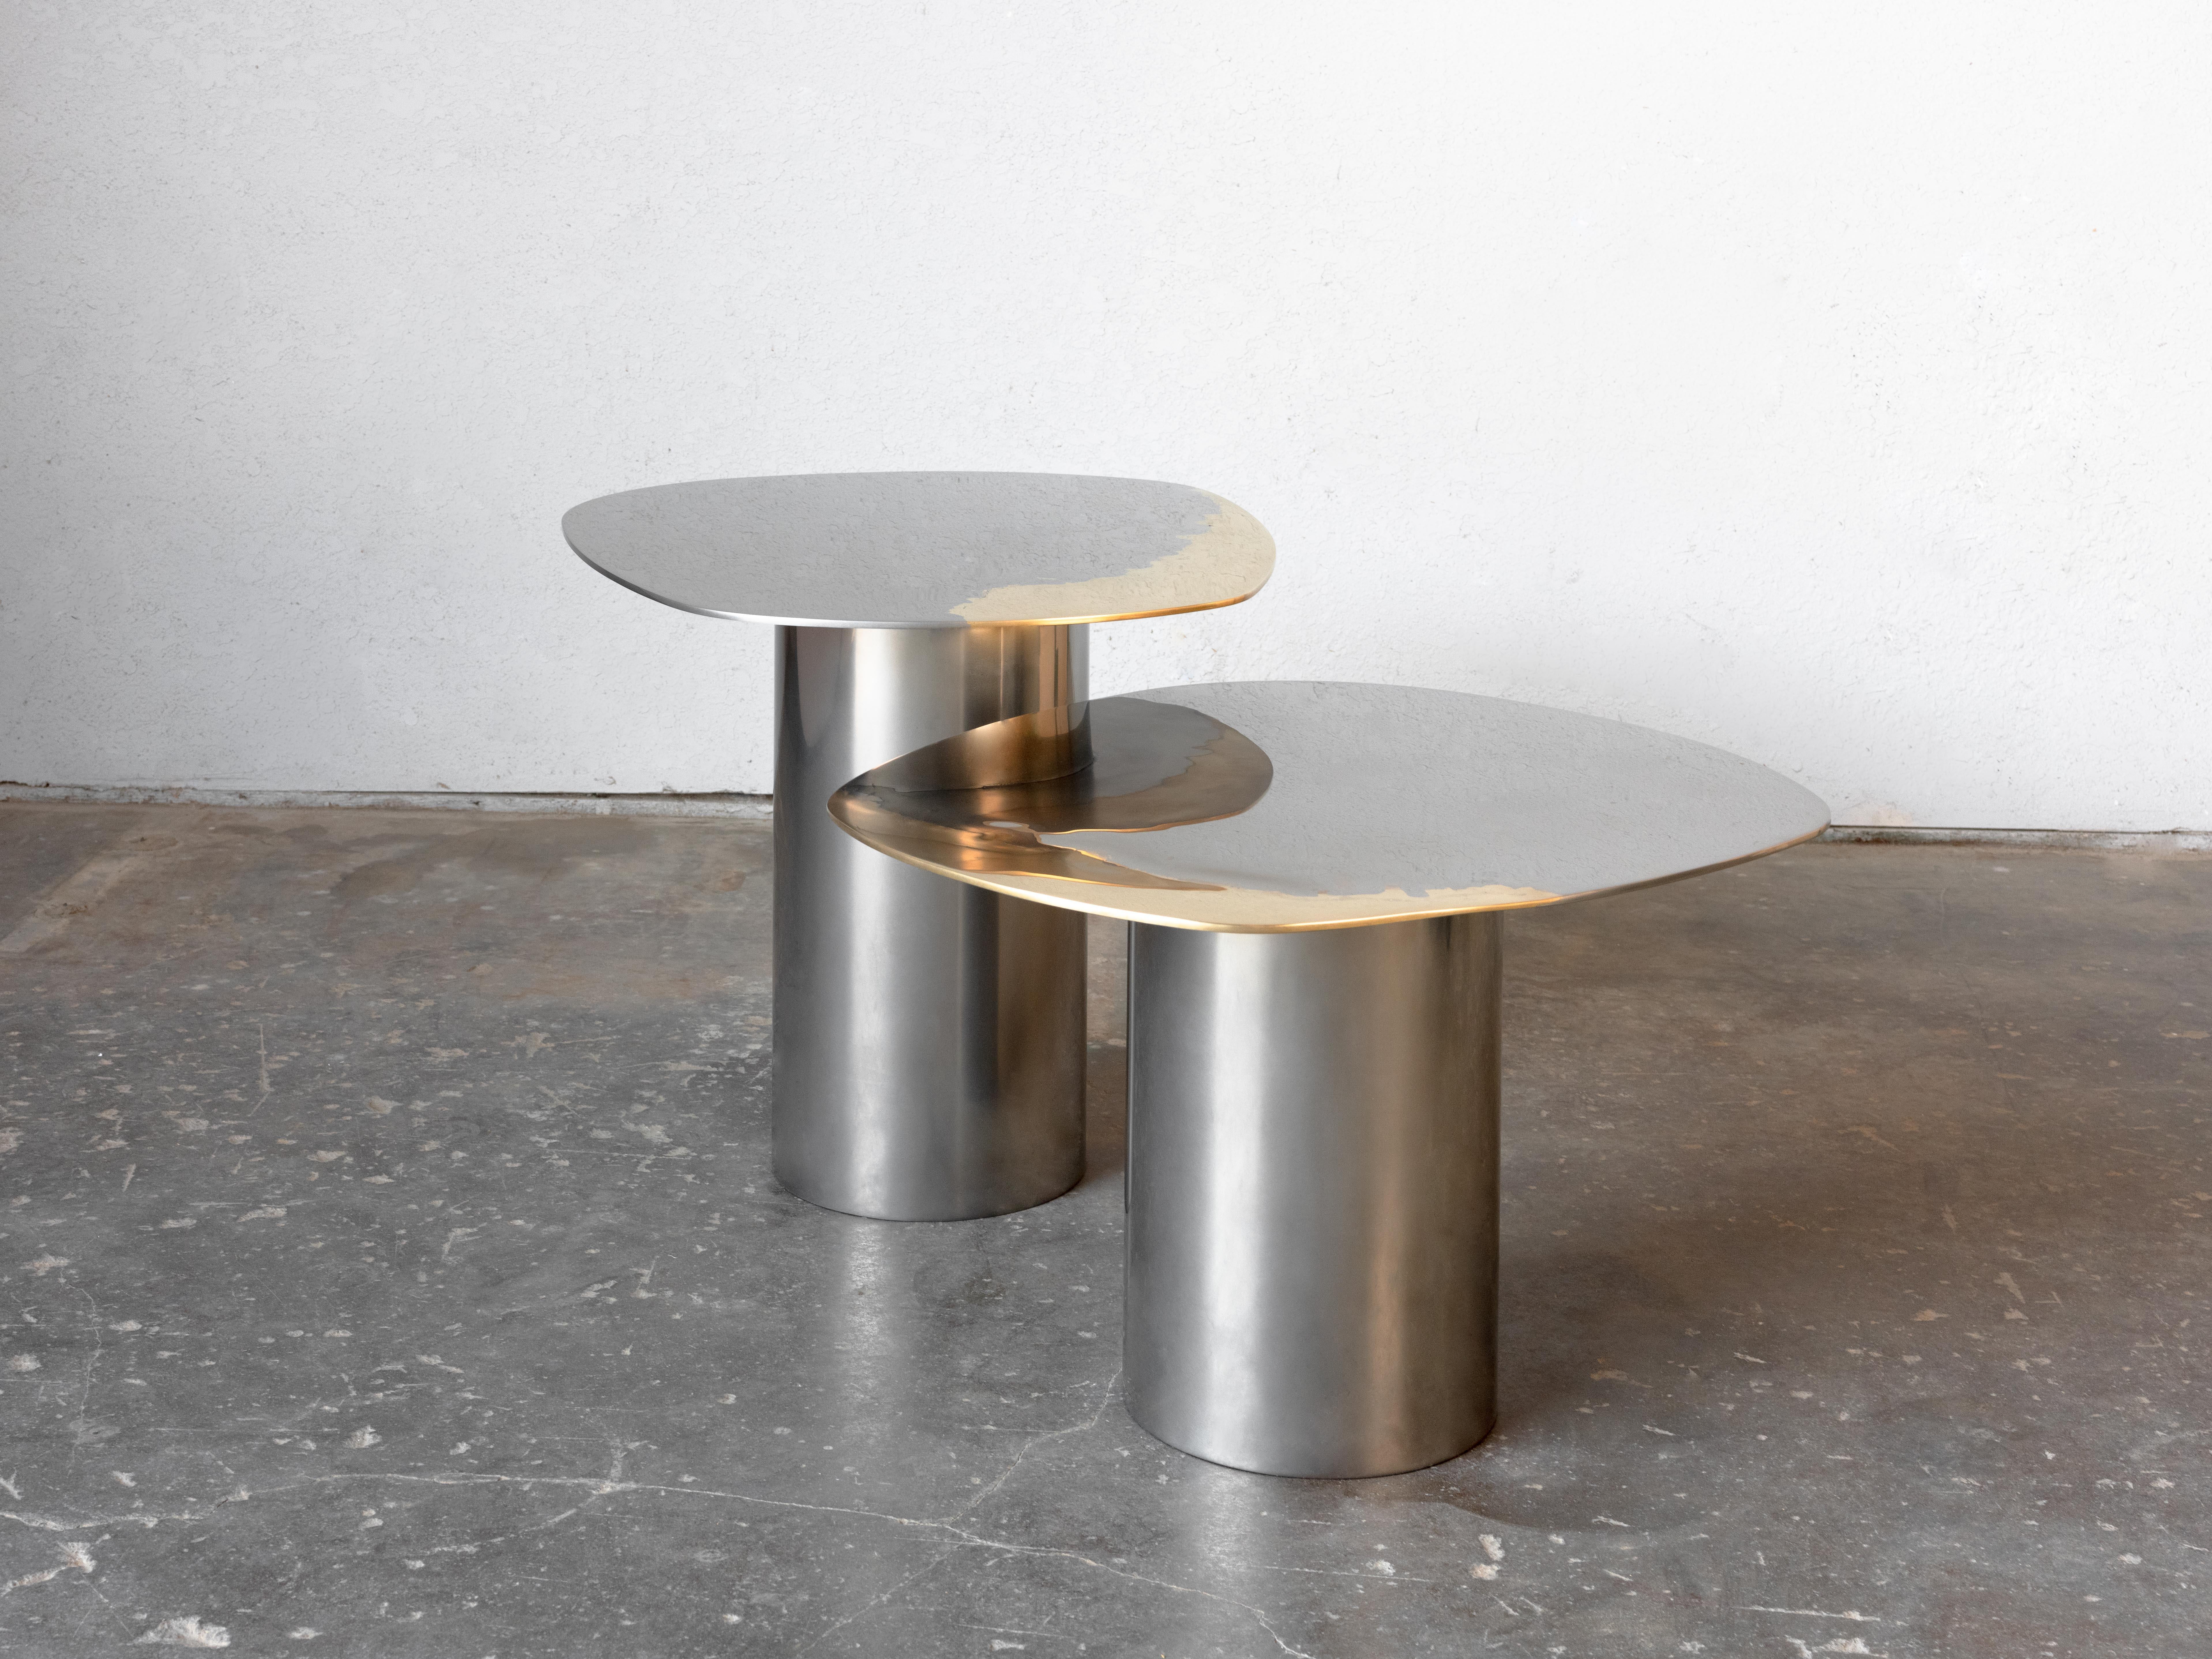 Set of 3 Custom Polished Brass Stainless Steel Transition Side Tables  In New Condition For Sale In Santa Monica, CA